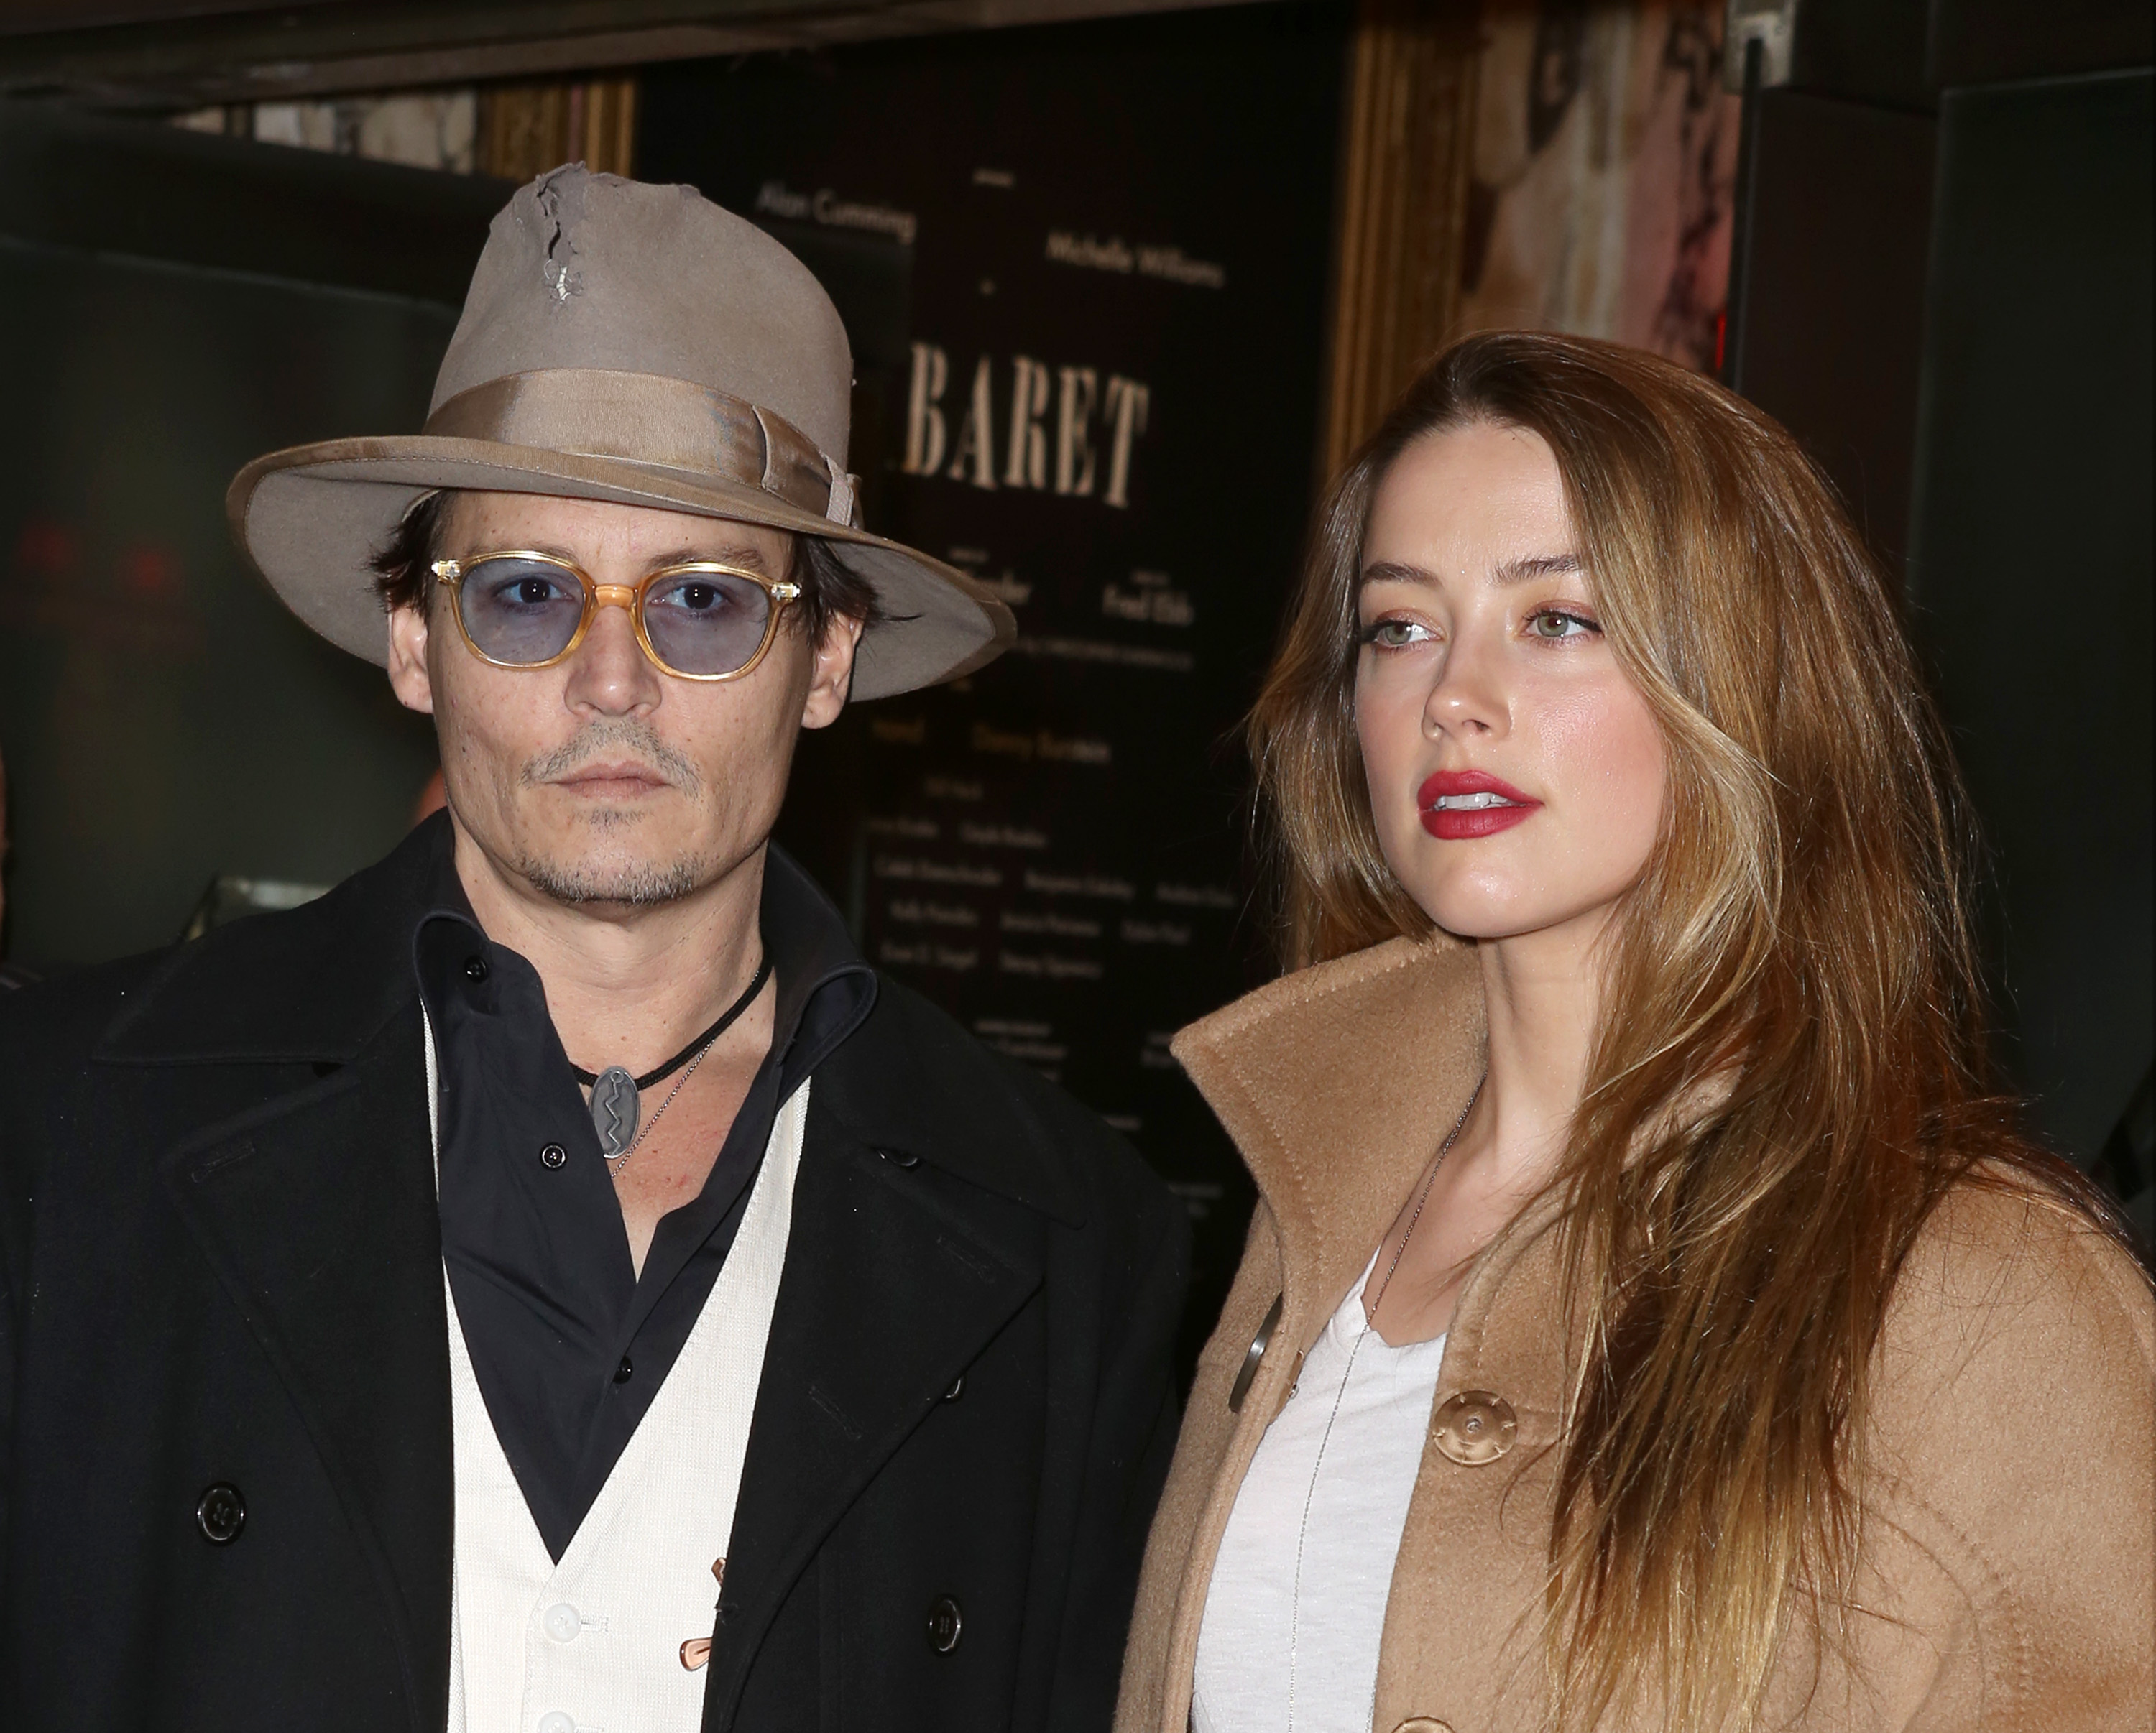 Actors Johnny Depp and Amber Heard attending the Broadway Opening Night Performance of "Cabaret" at Studio 54 on April 24, 2014 in New York City | Source: Getty Images